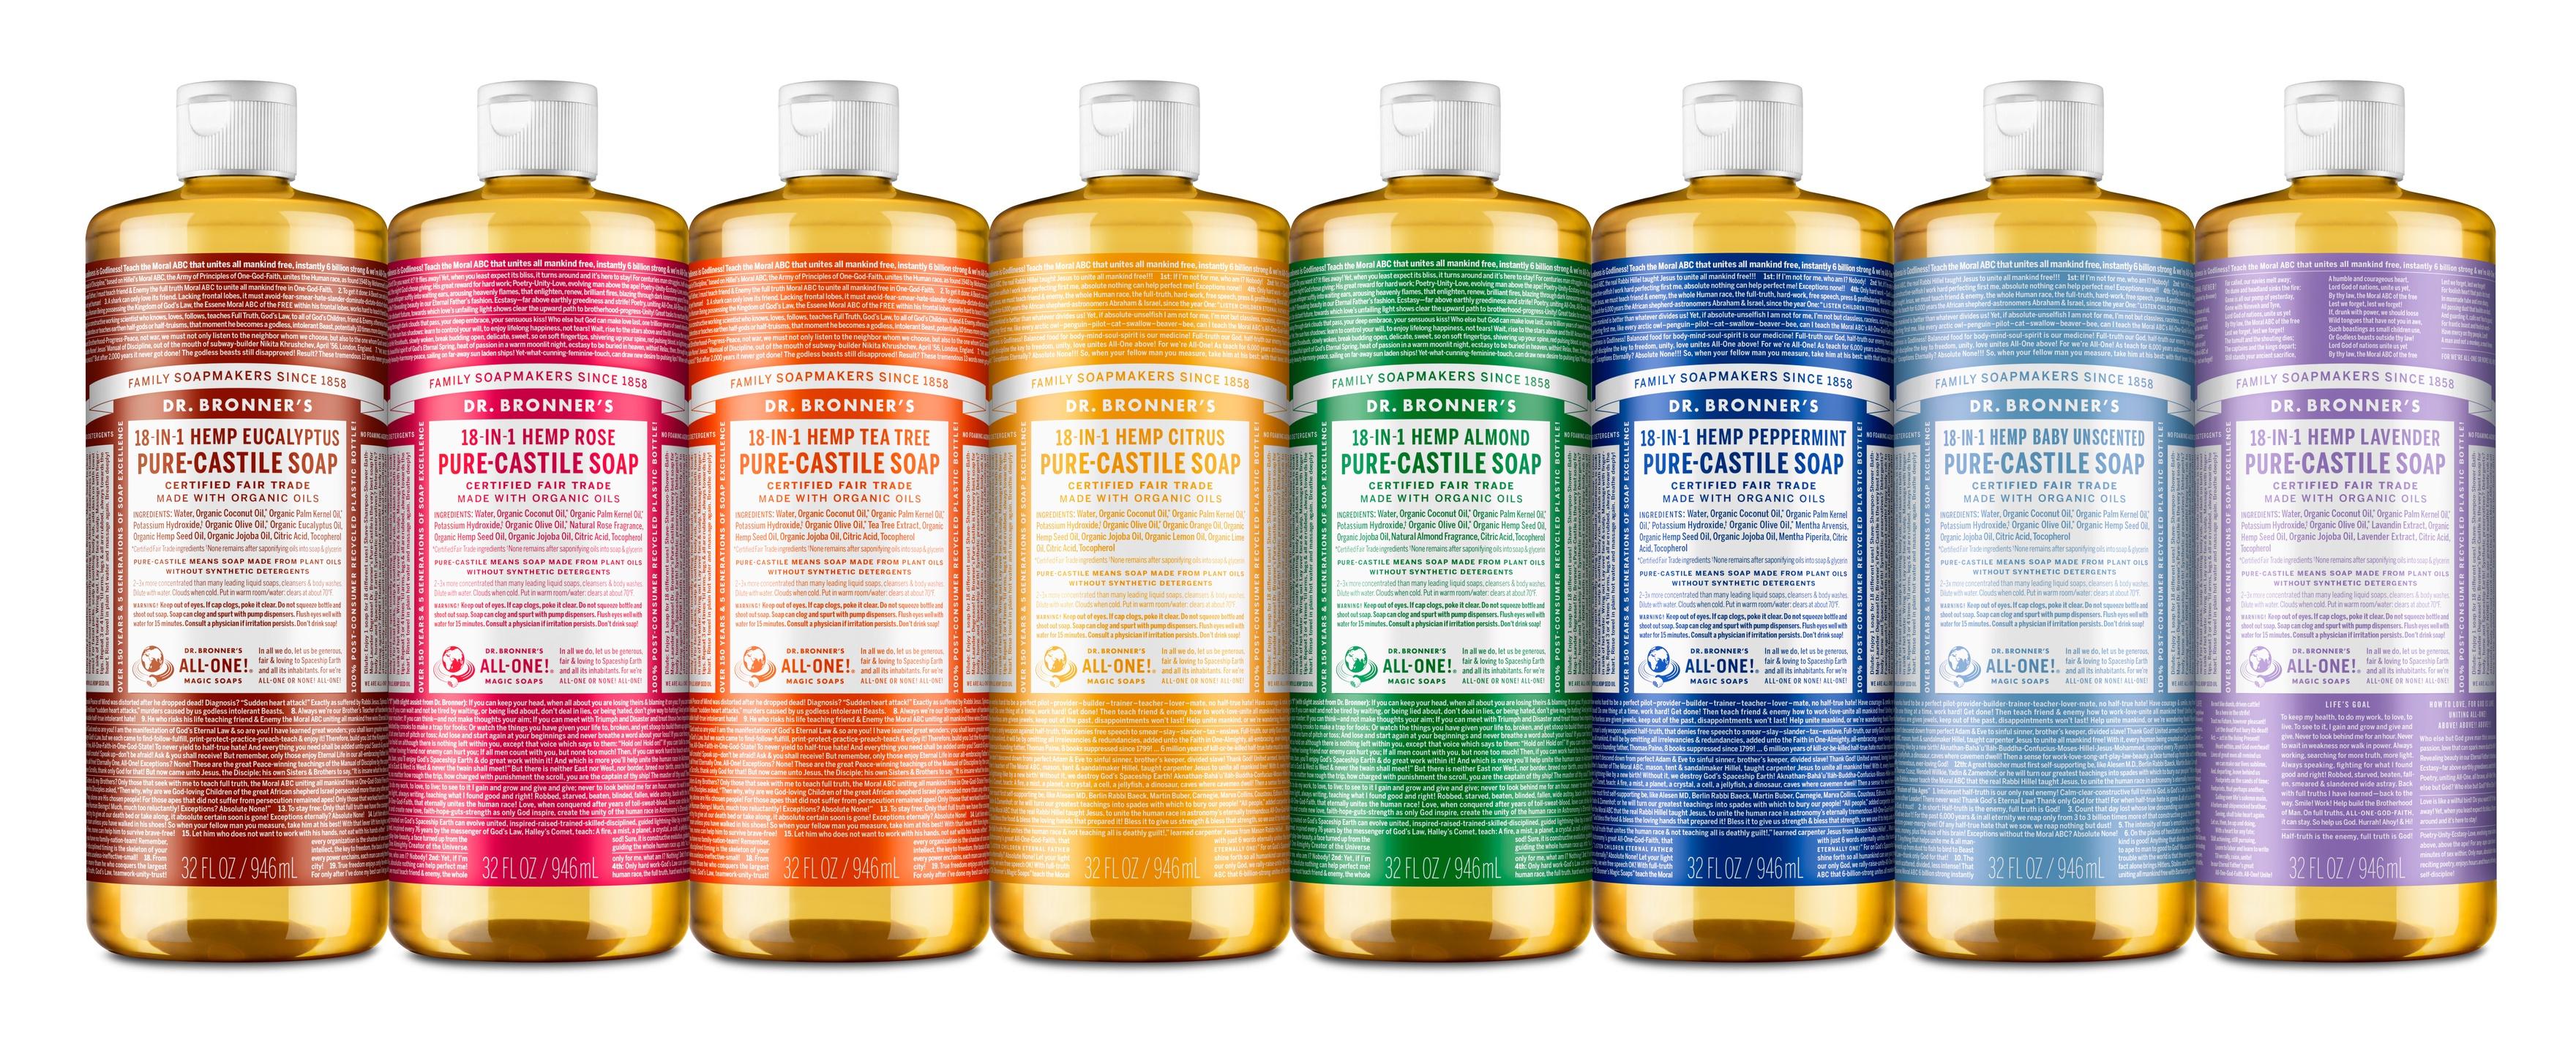 Dr. Bronner's Magic Soap - Castile Liquid - Baby Unscented - 32 oz - image 4 of 4